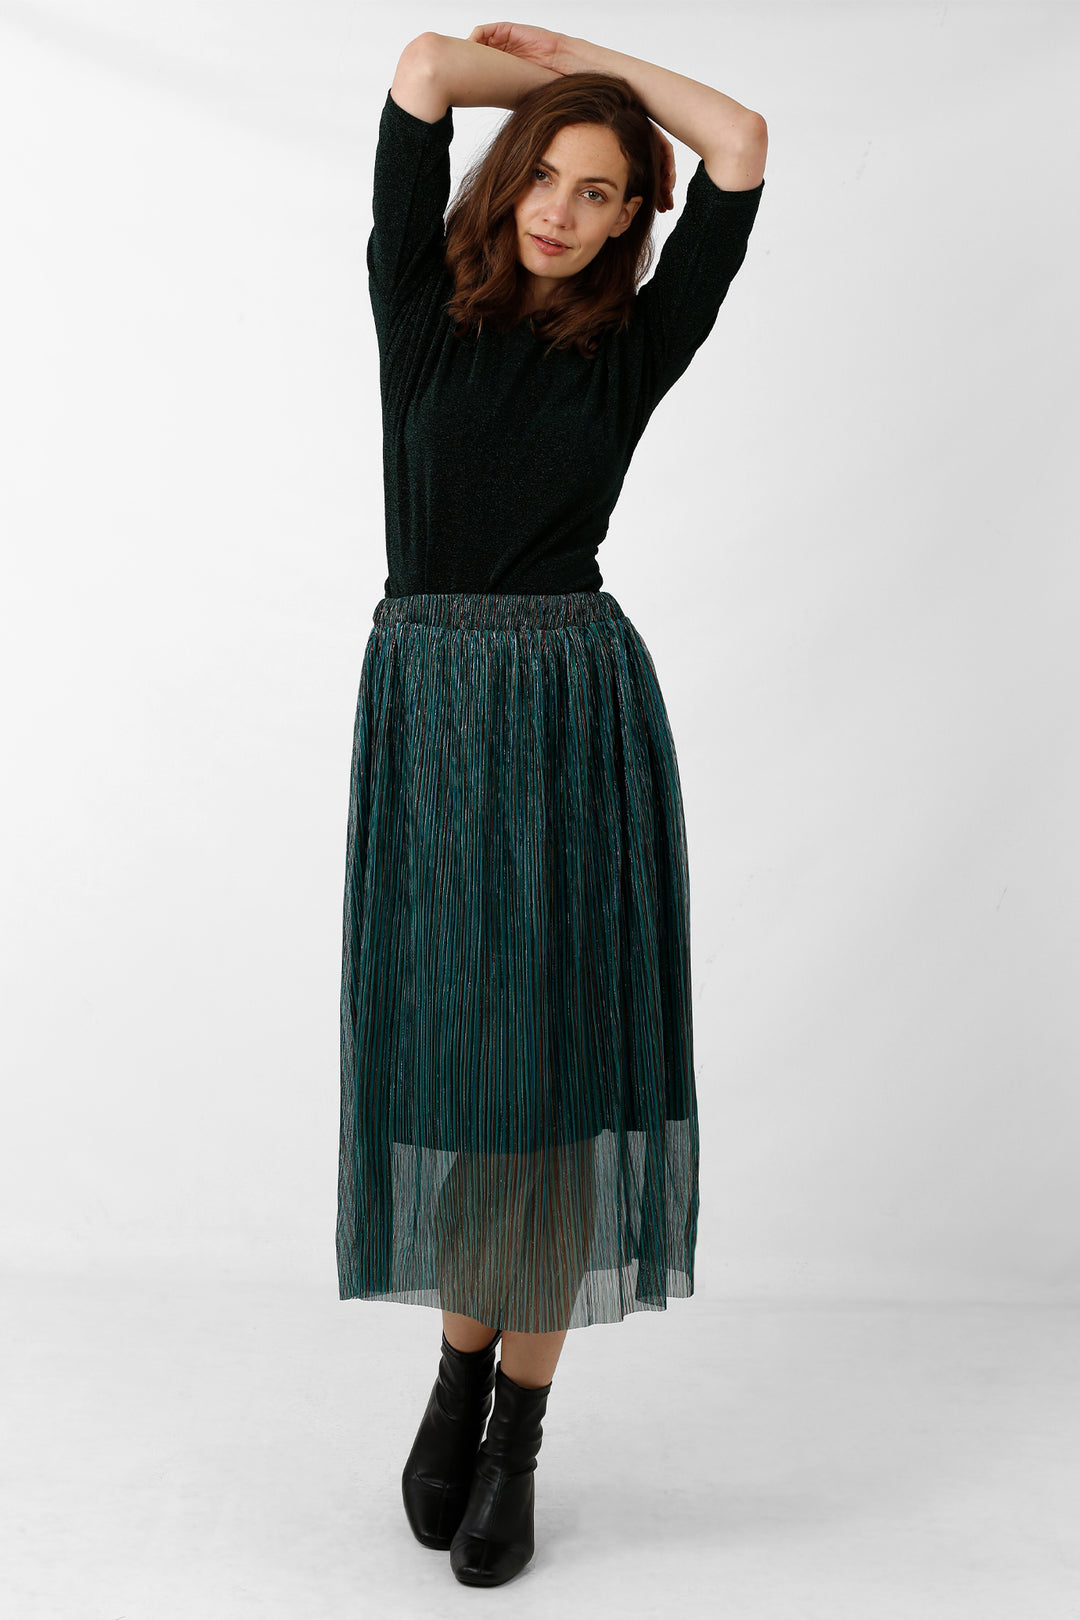 Green Striped Pleated Skirt